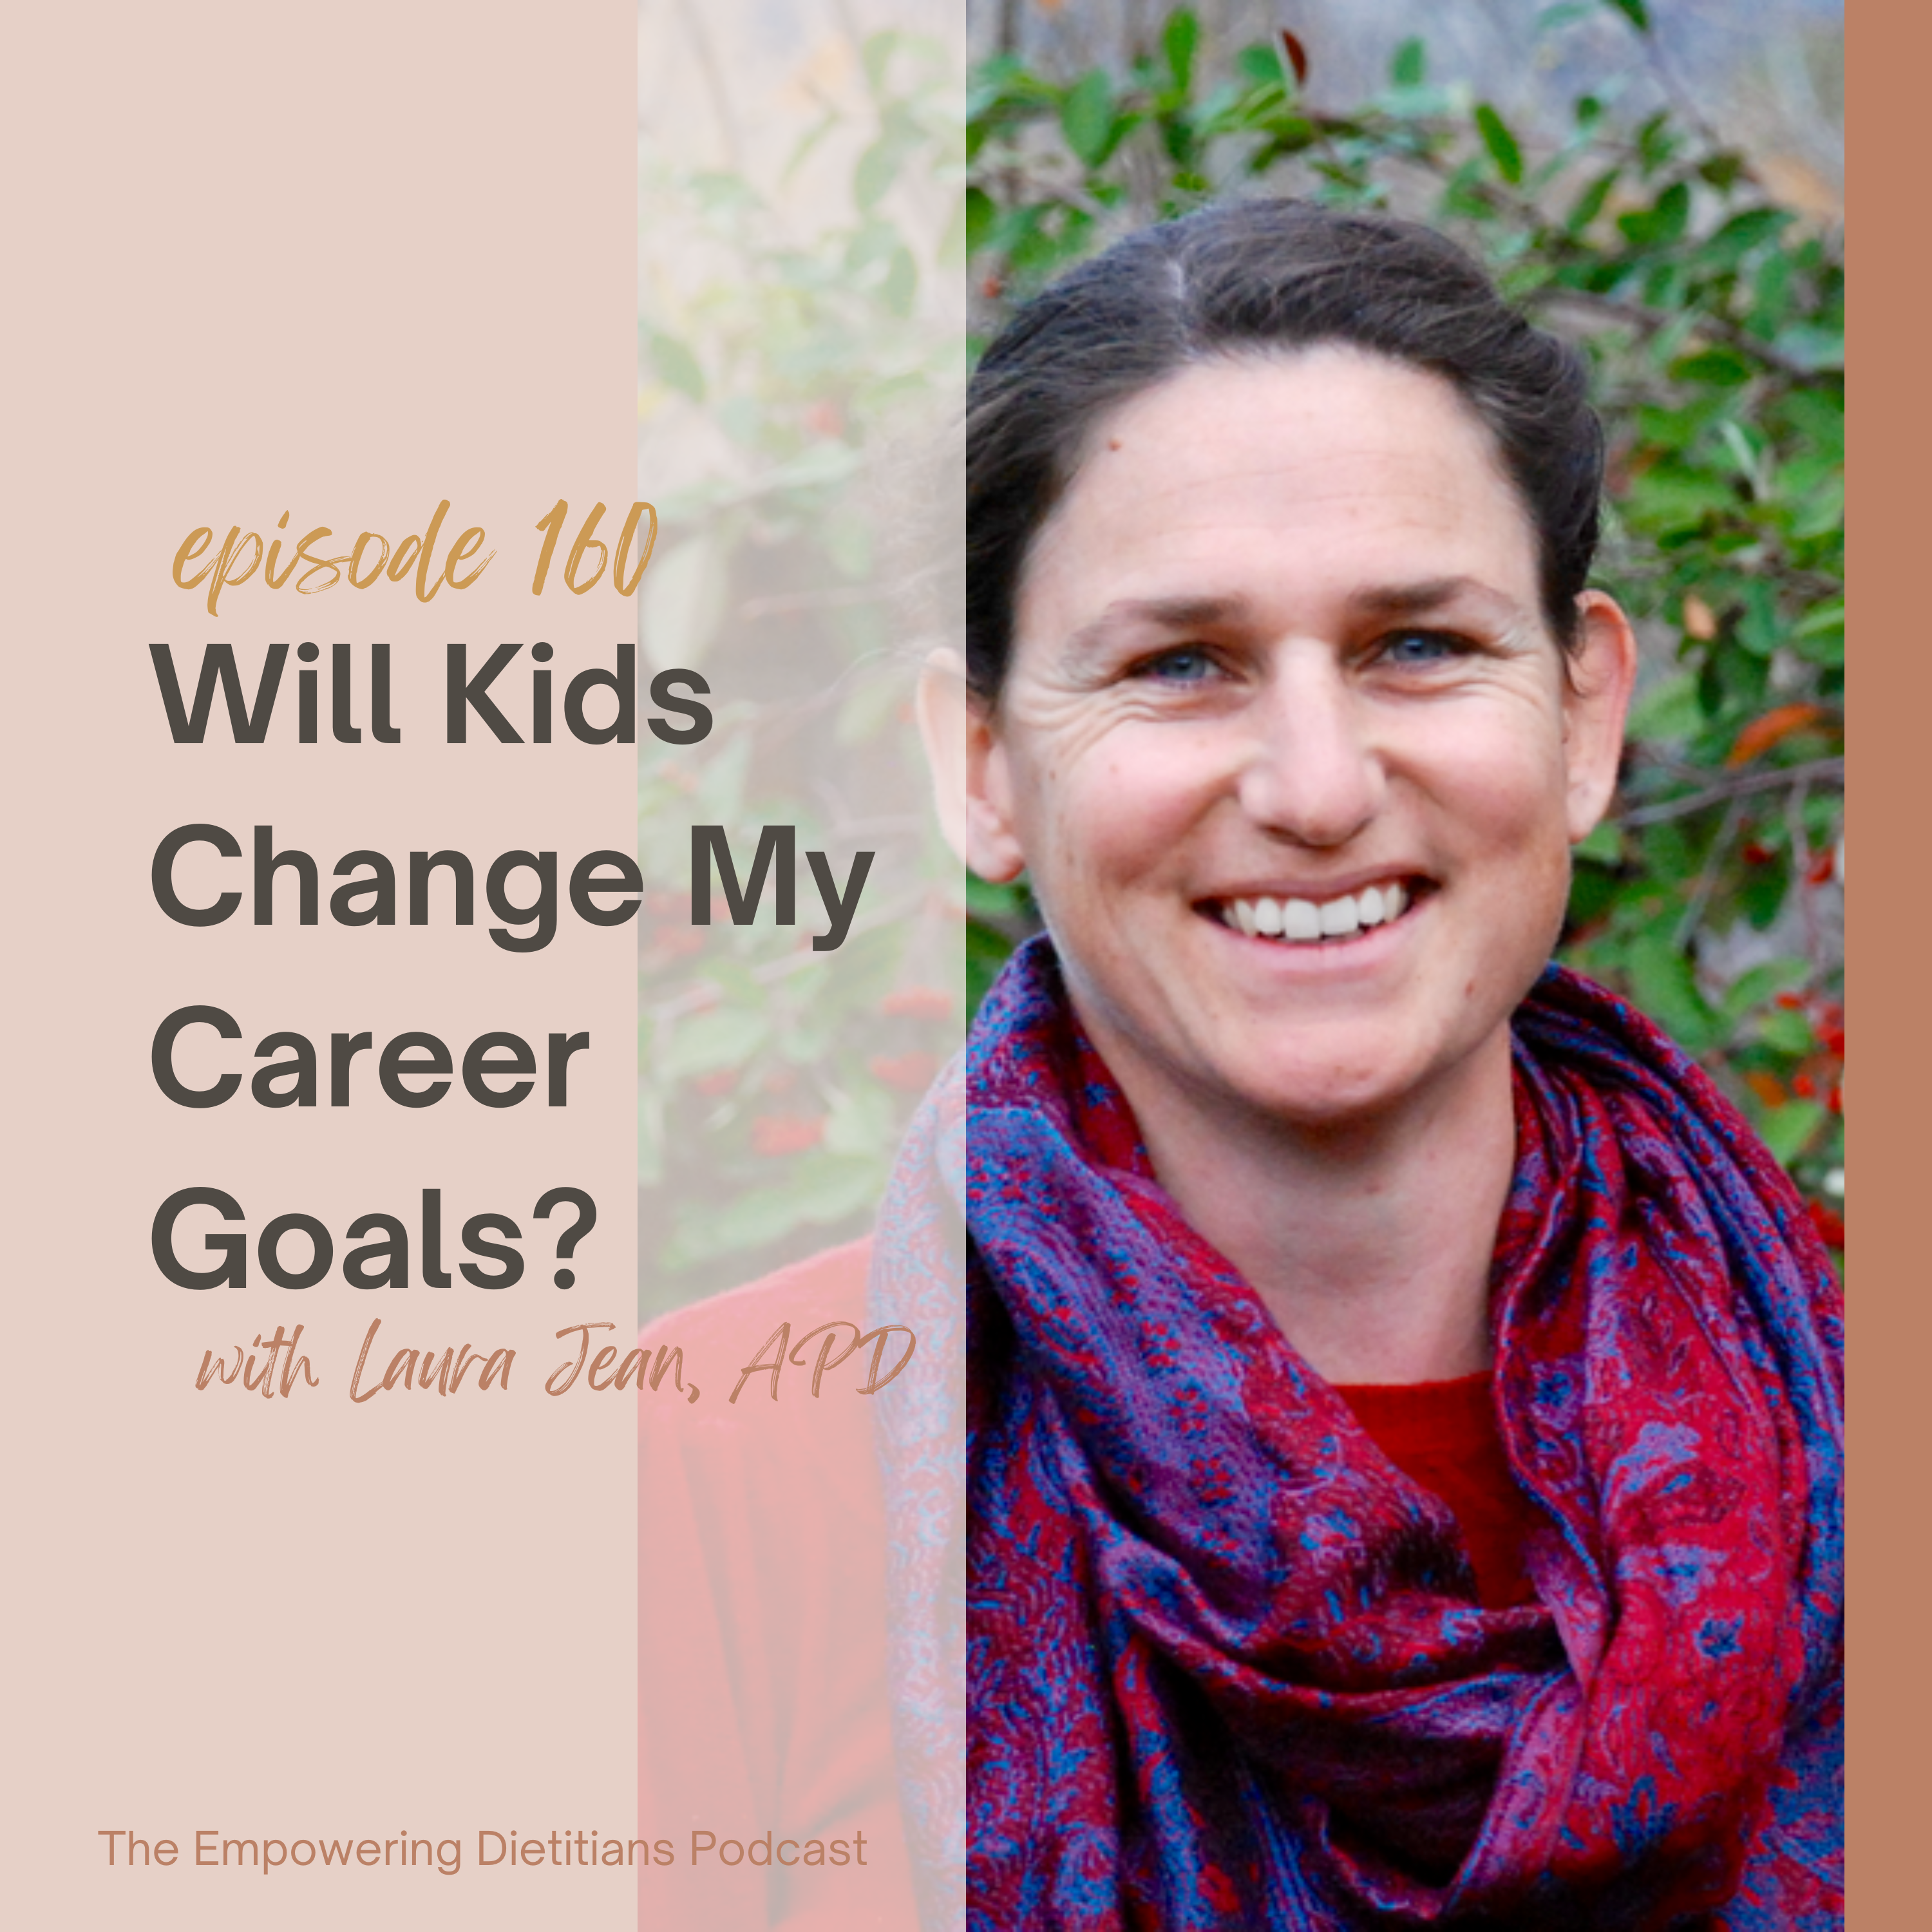 will kids change my career goals? with laura jean